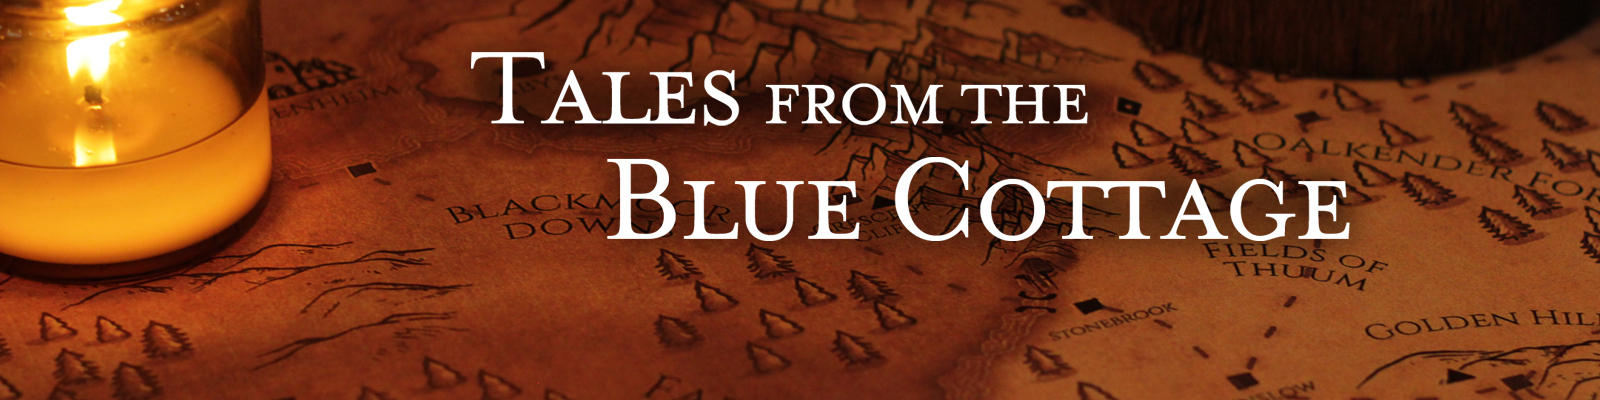 DnD Tales from the Blue Cottage